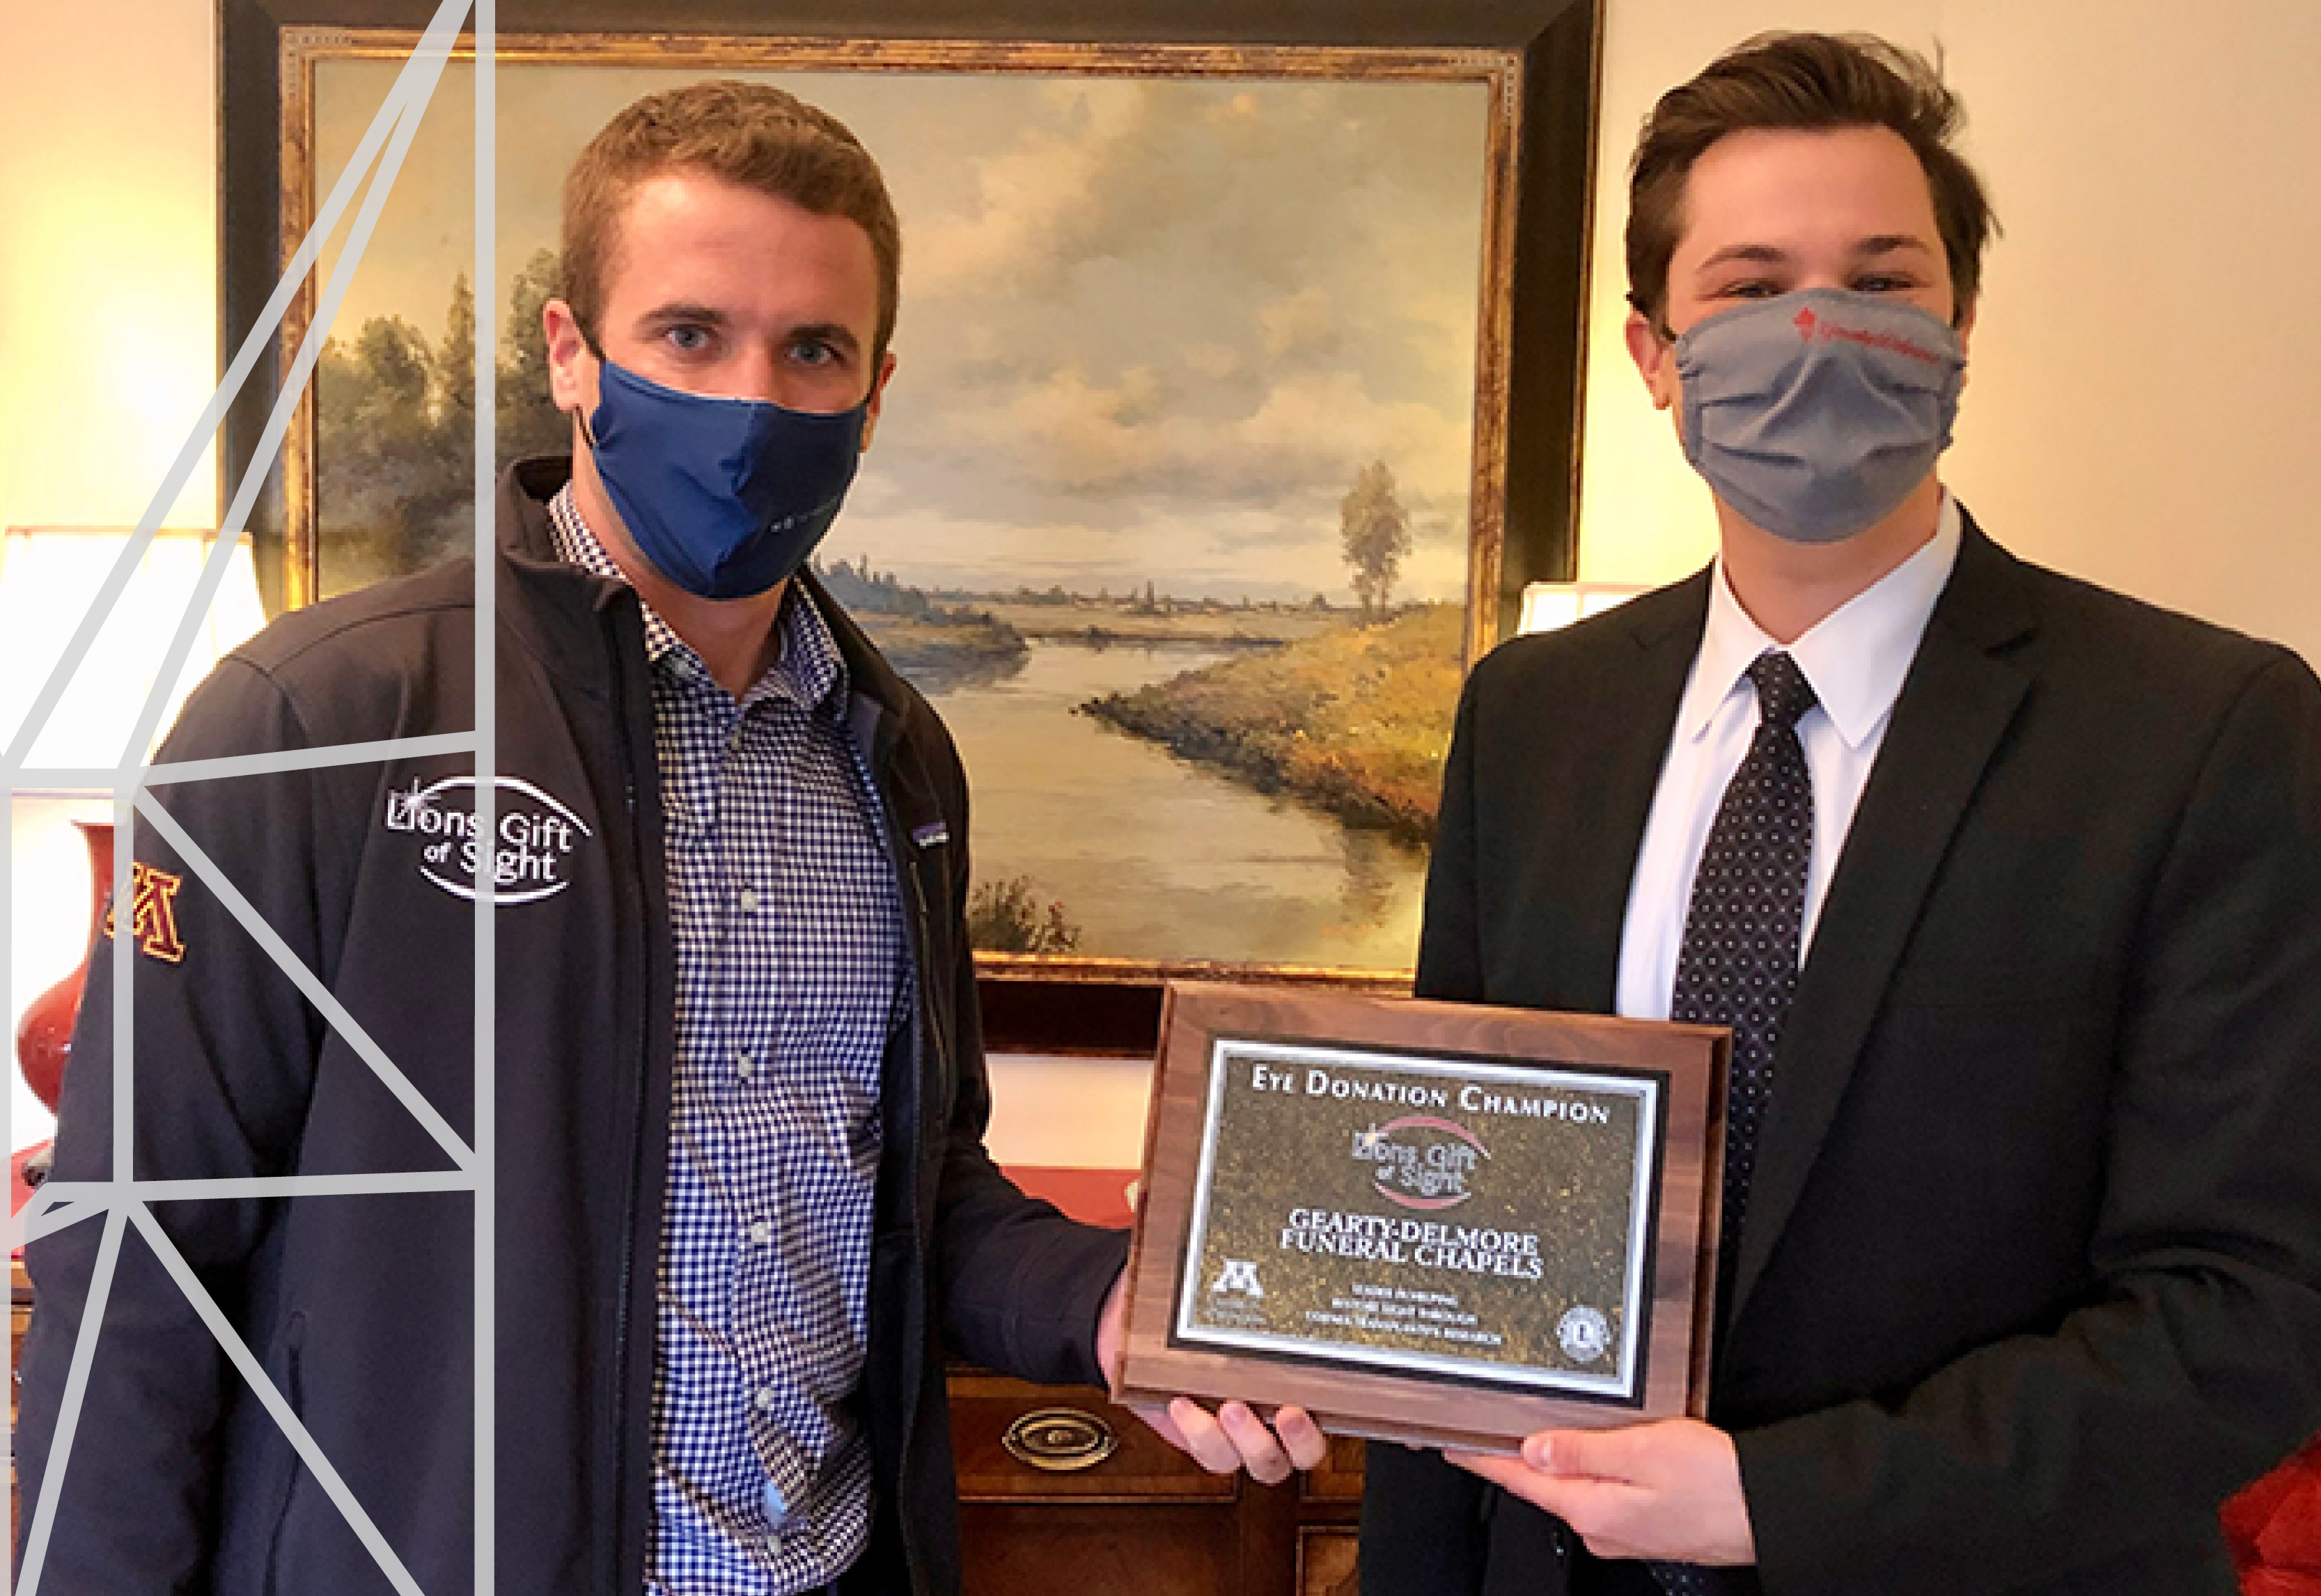 Image of Eye Tissue Recovery Manger Patrick Becker and Funeral Director Matt of the Gearty-Delmore Funeral Chapels.